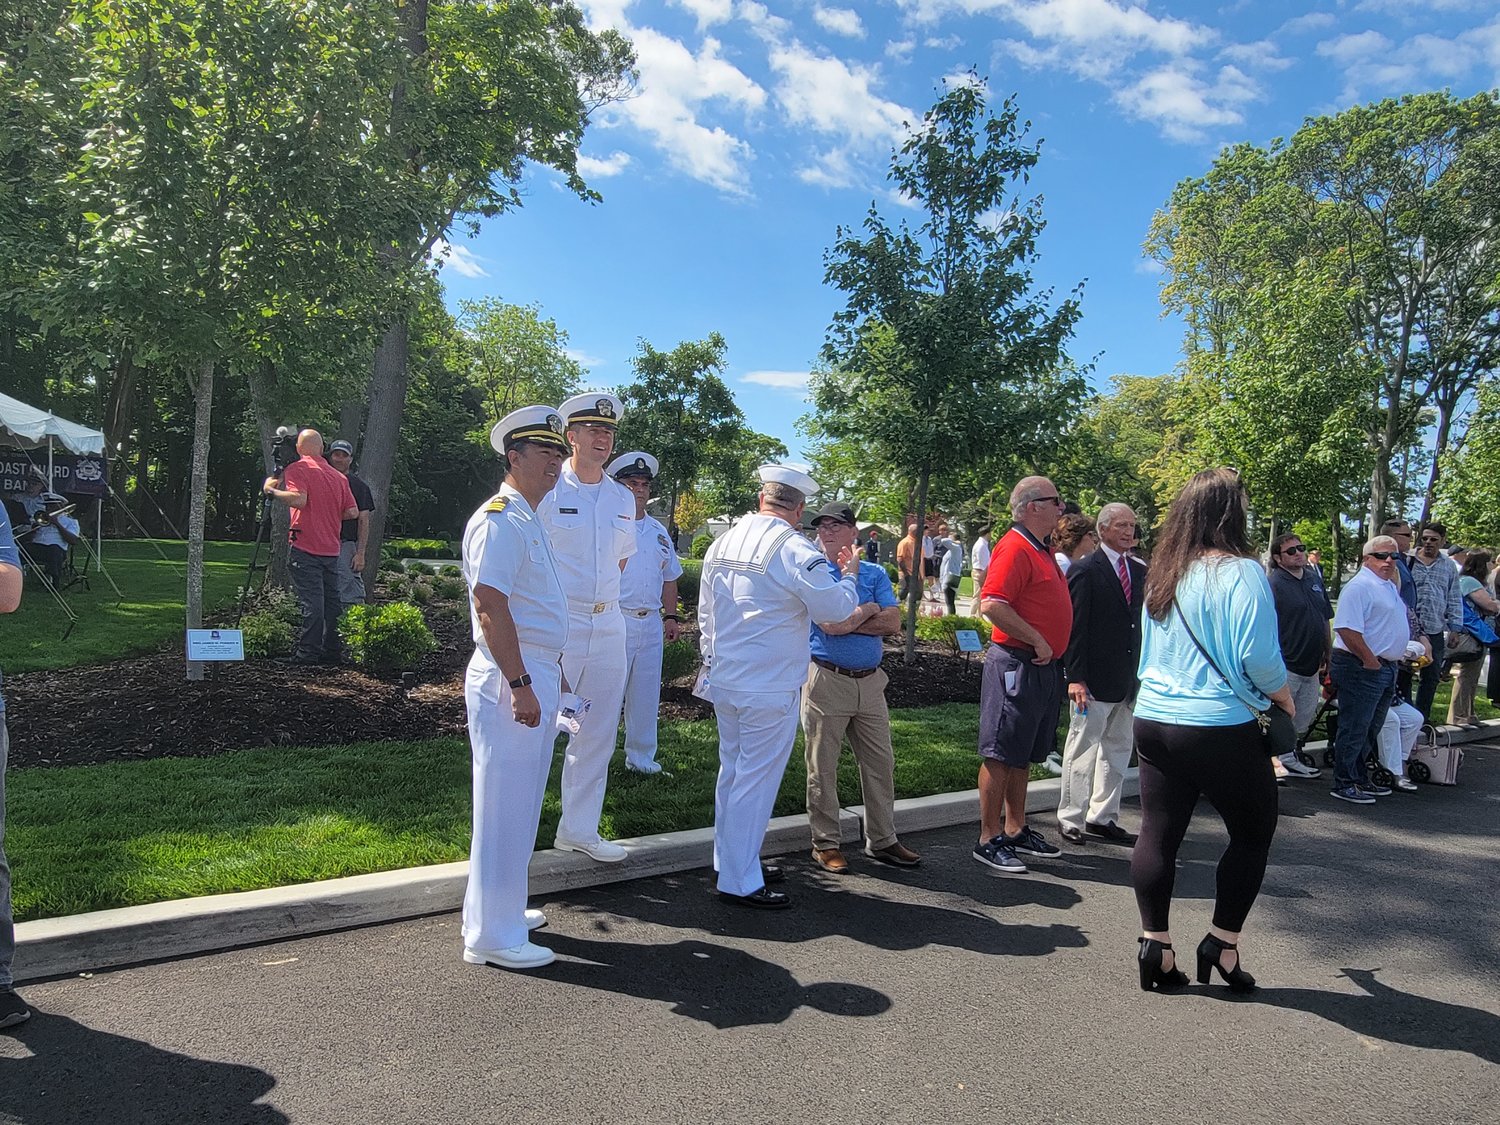 Current service members of the Navy were in attendance for the ceremony.